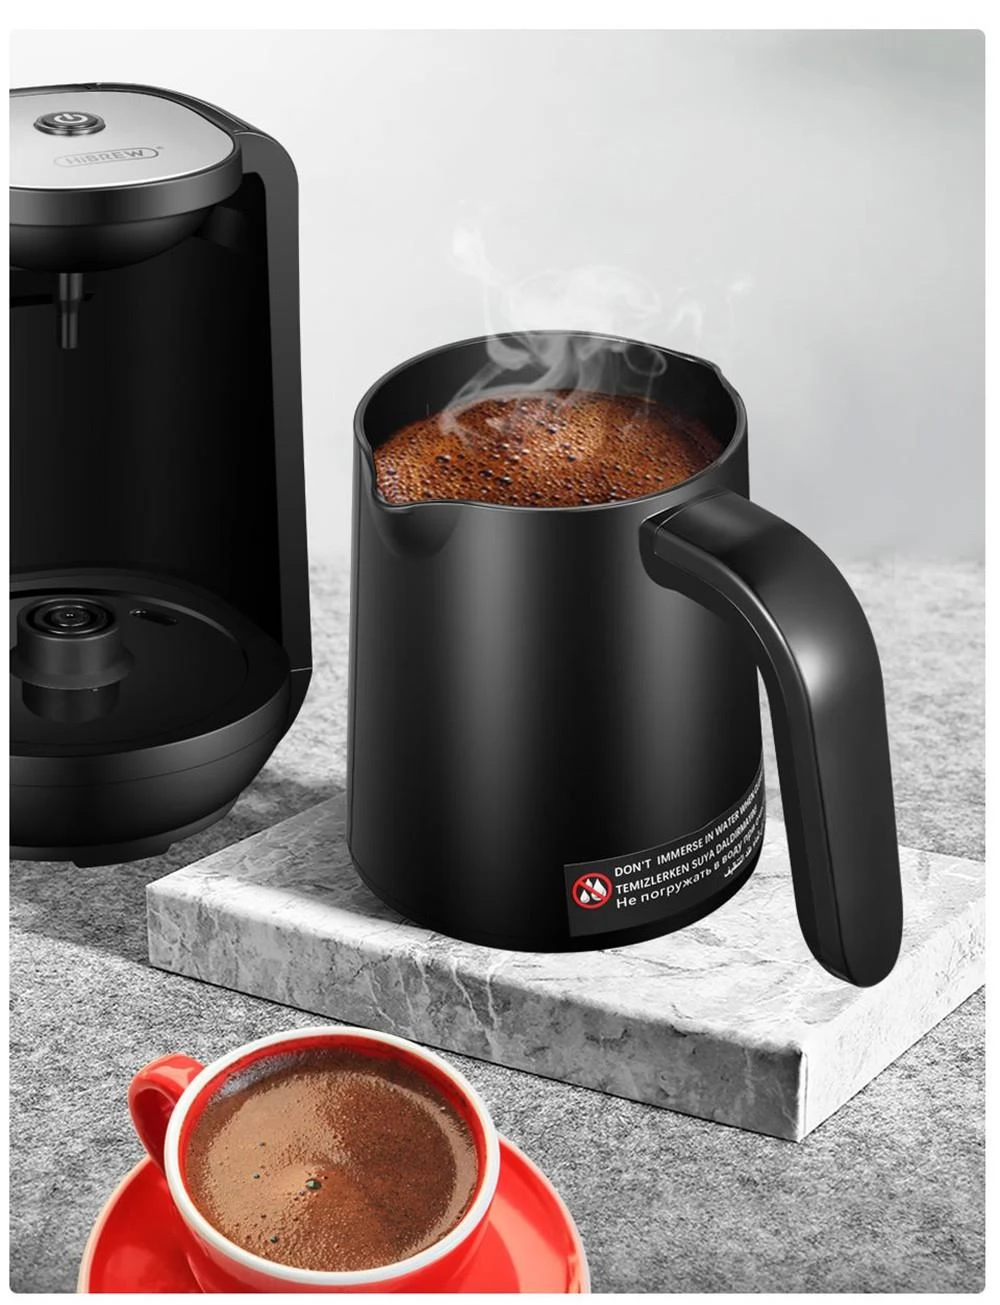 HiBREW H9 480W Automatic Turkish Coffee Machine, 250ml Electric Pot Ground Coffee Maker with LED Indicator